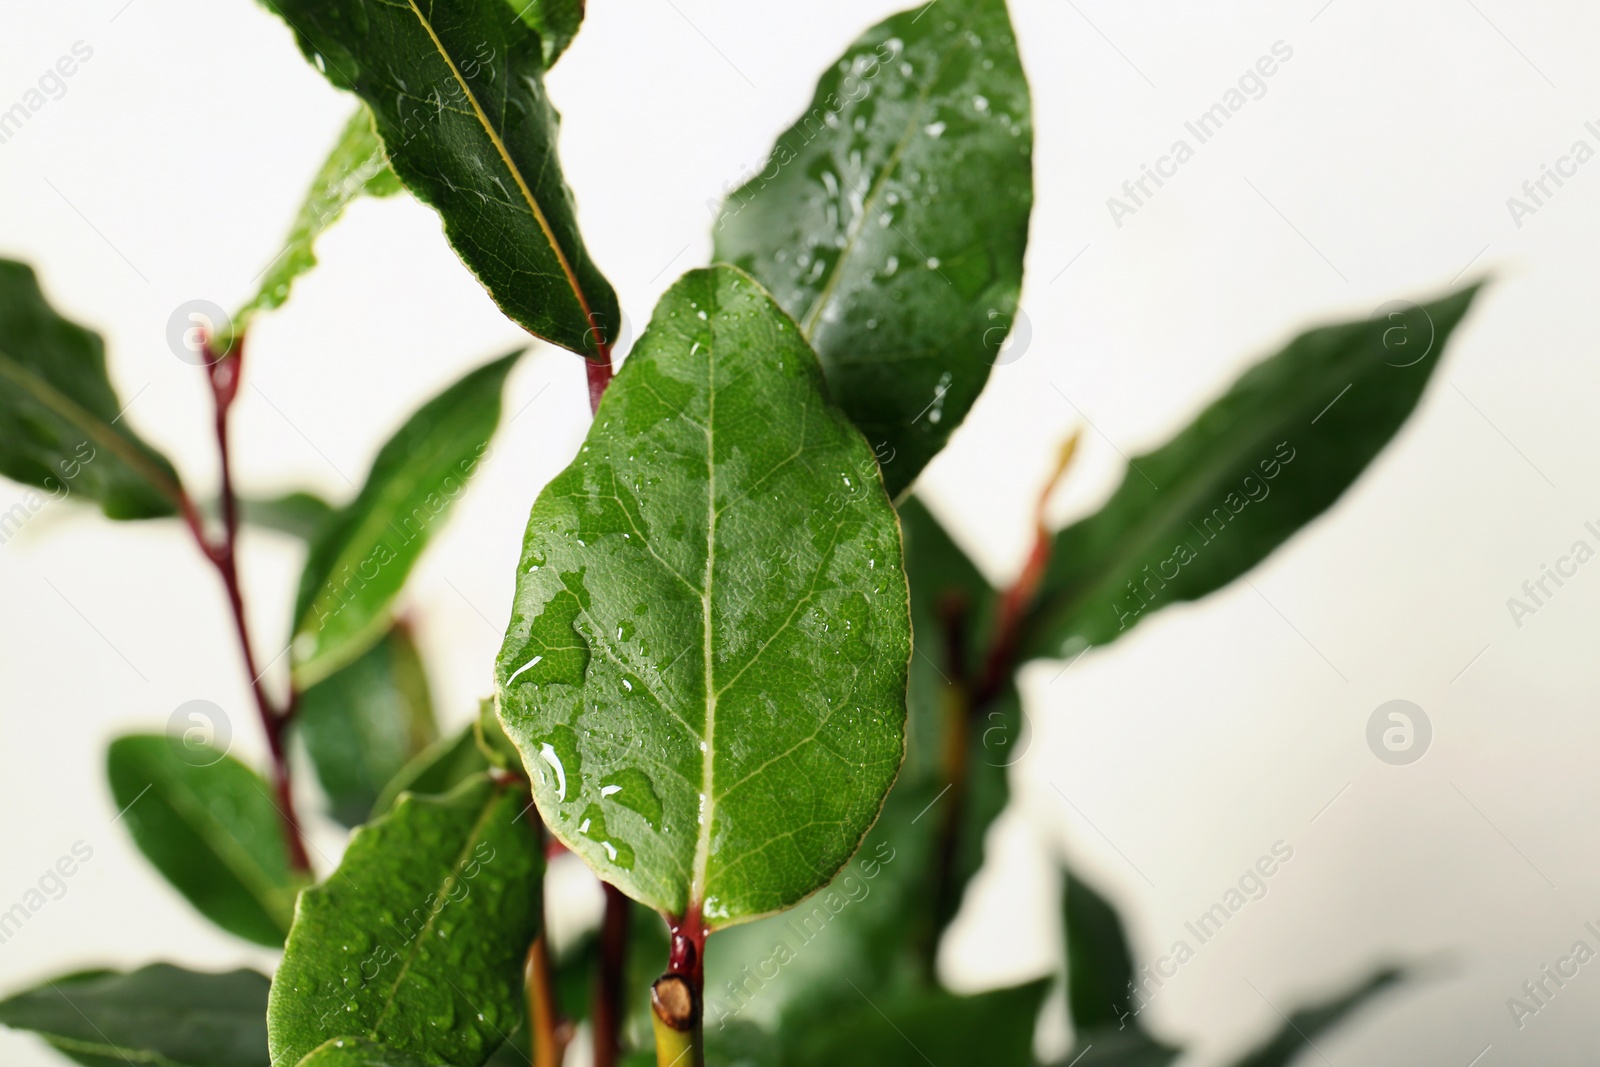 Photo of Bay tree with green leaves growing on white background, closeup